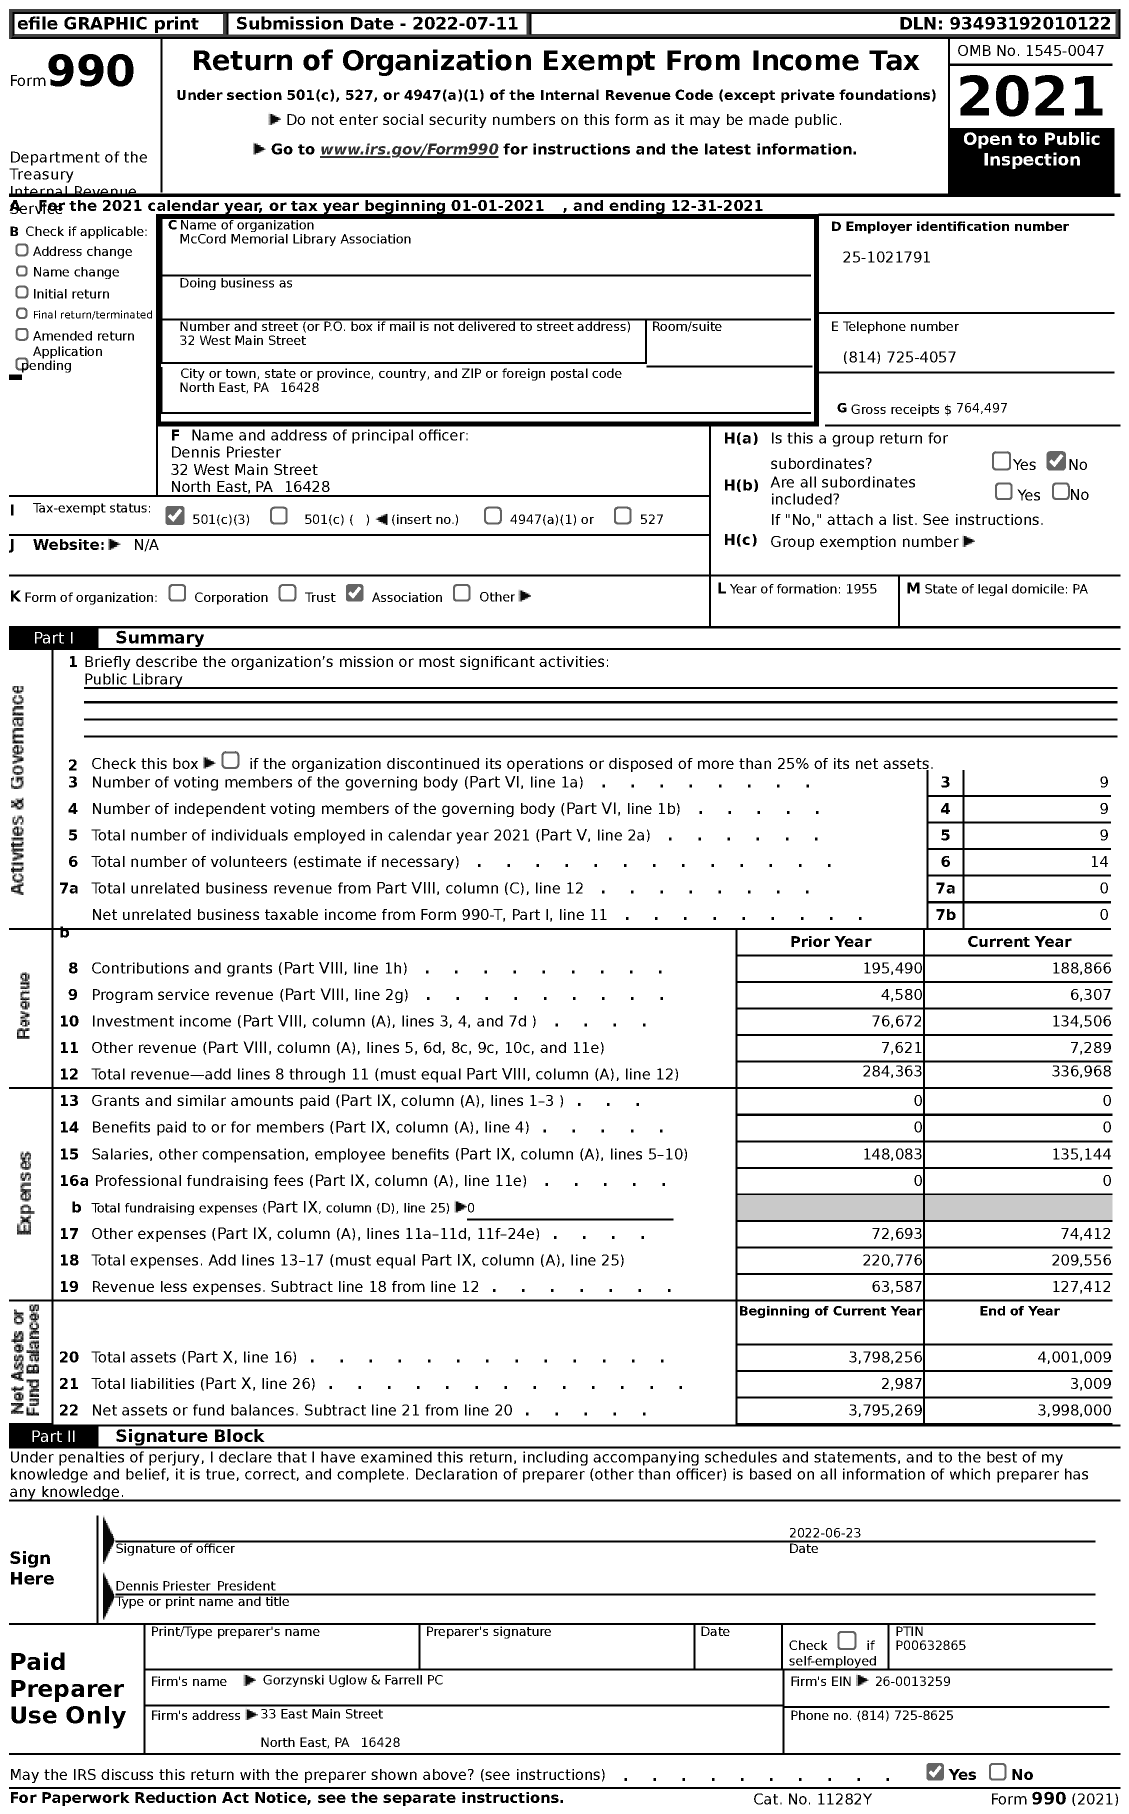 Image of first page of 2021 Form 990 for McCord Memorial Library Association